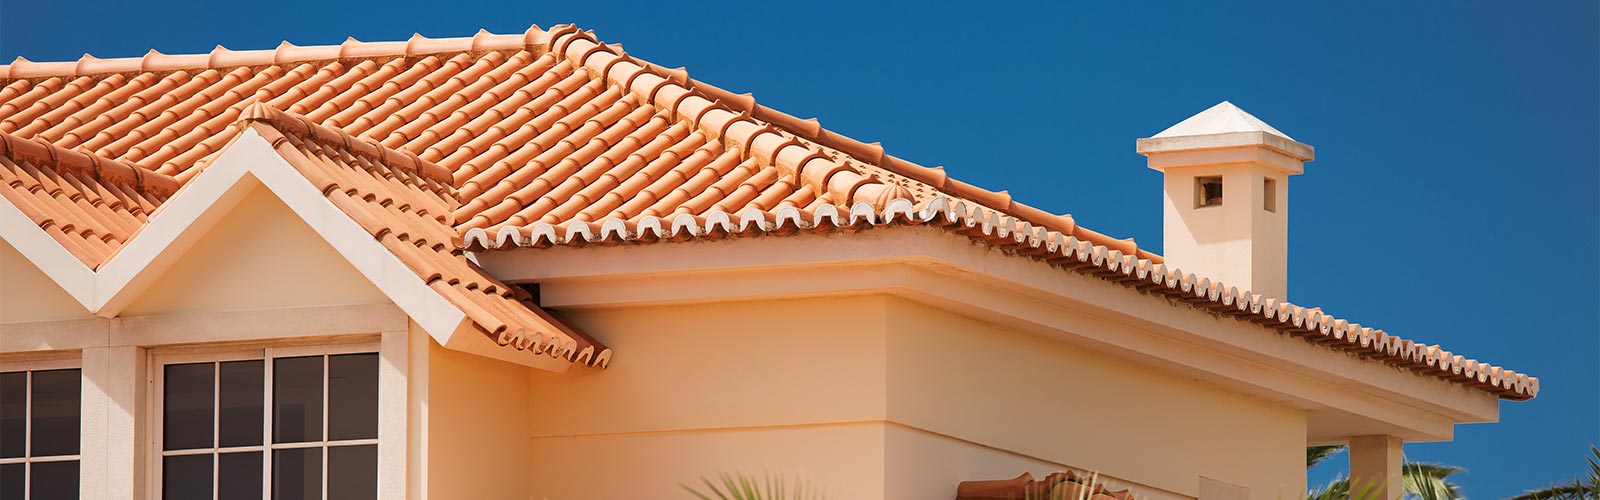 Spanish Tile Roof in South Florida